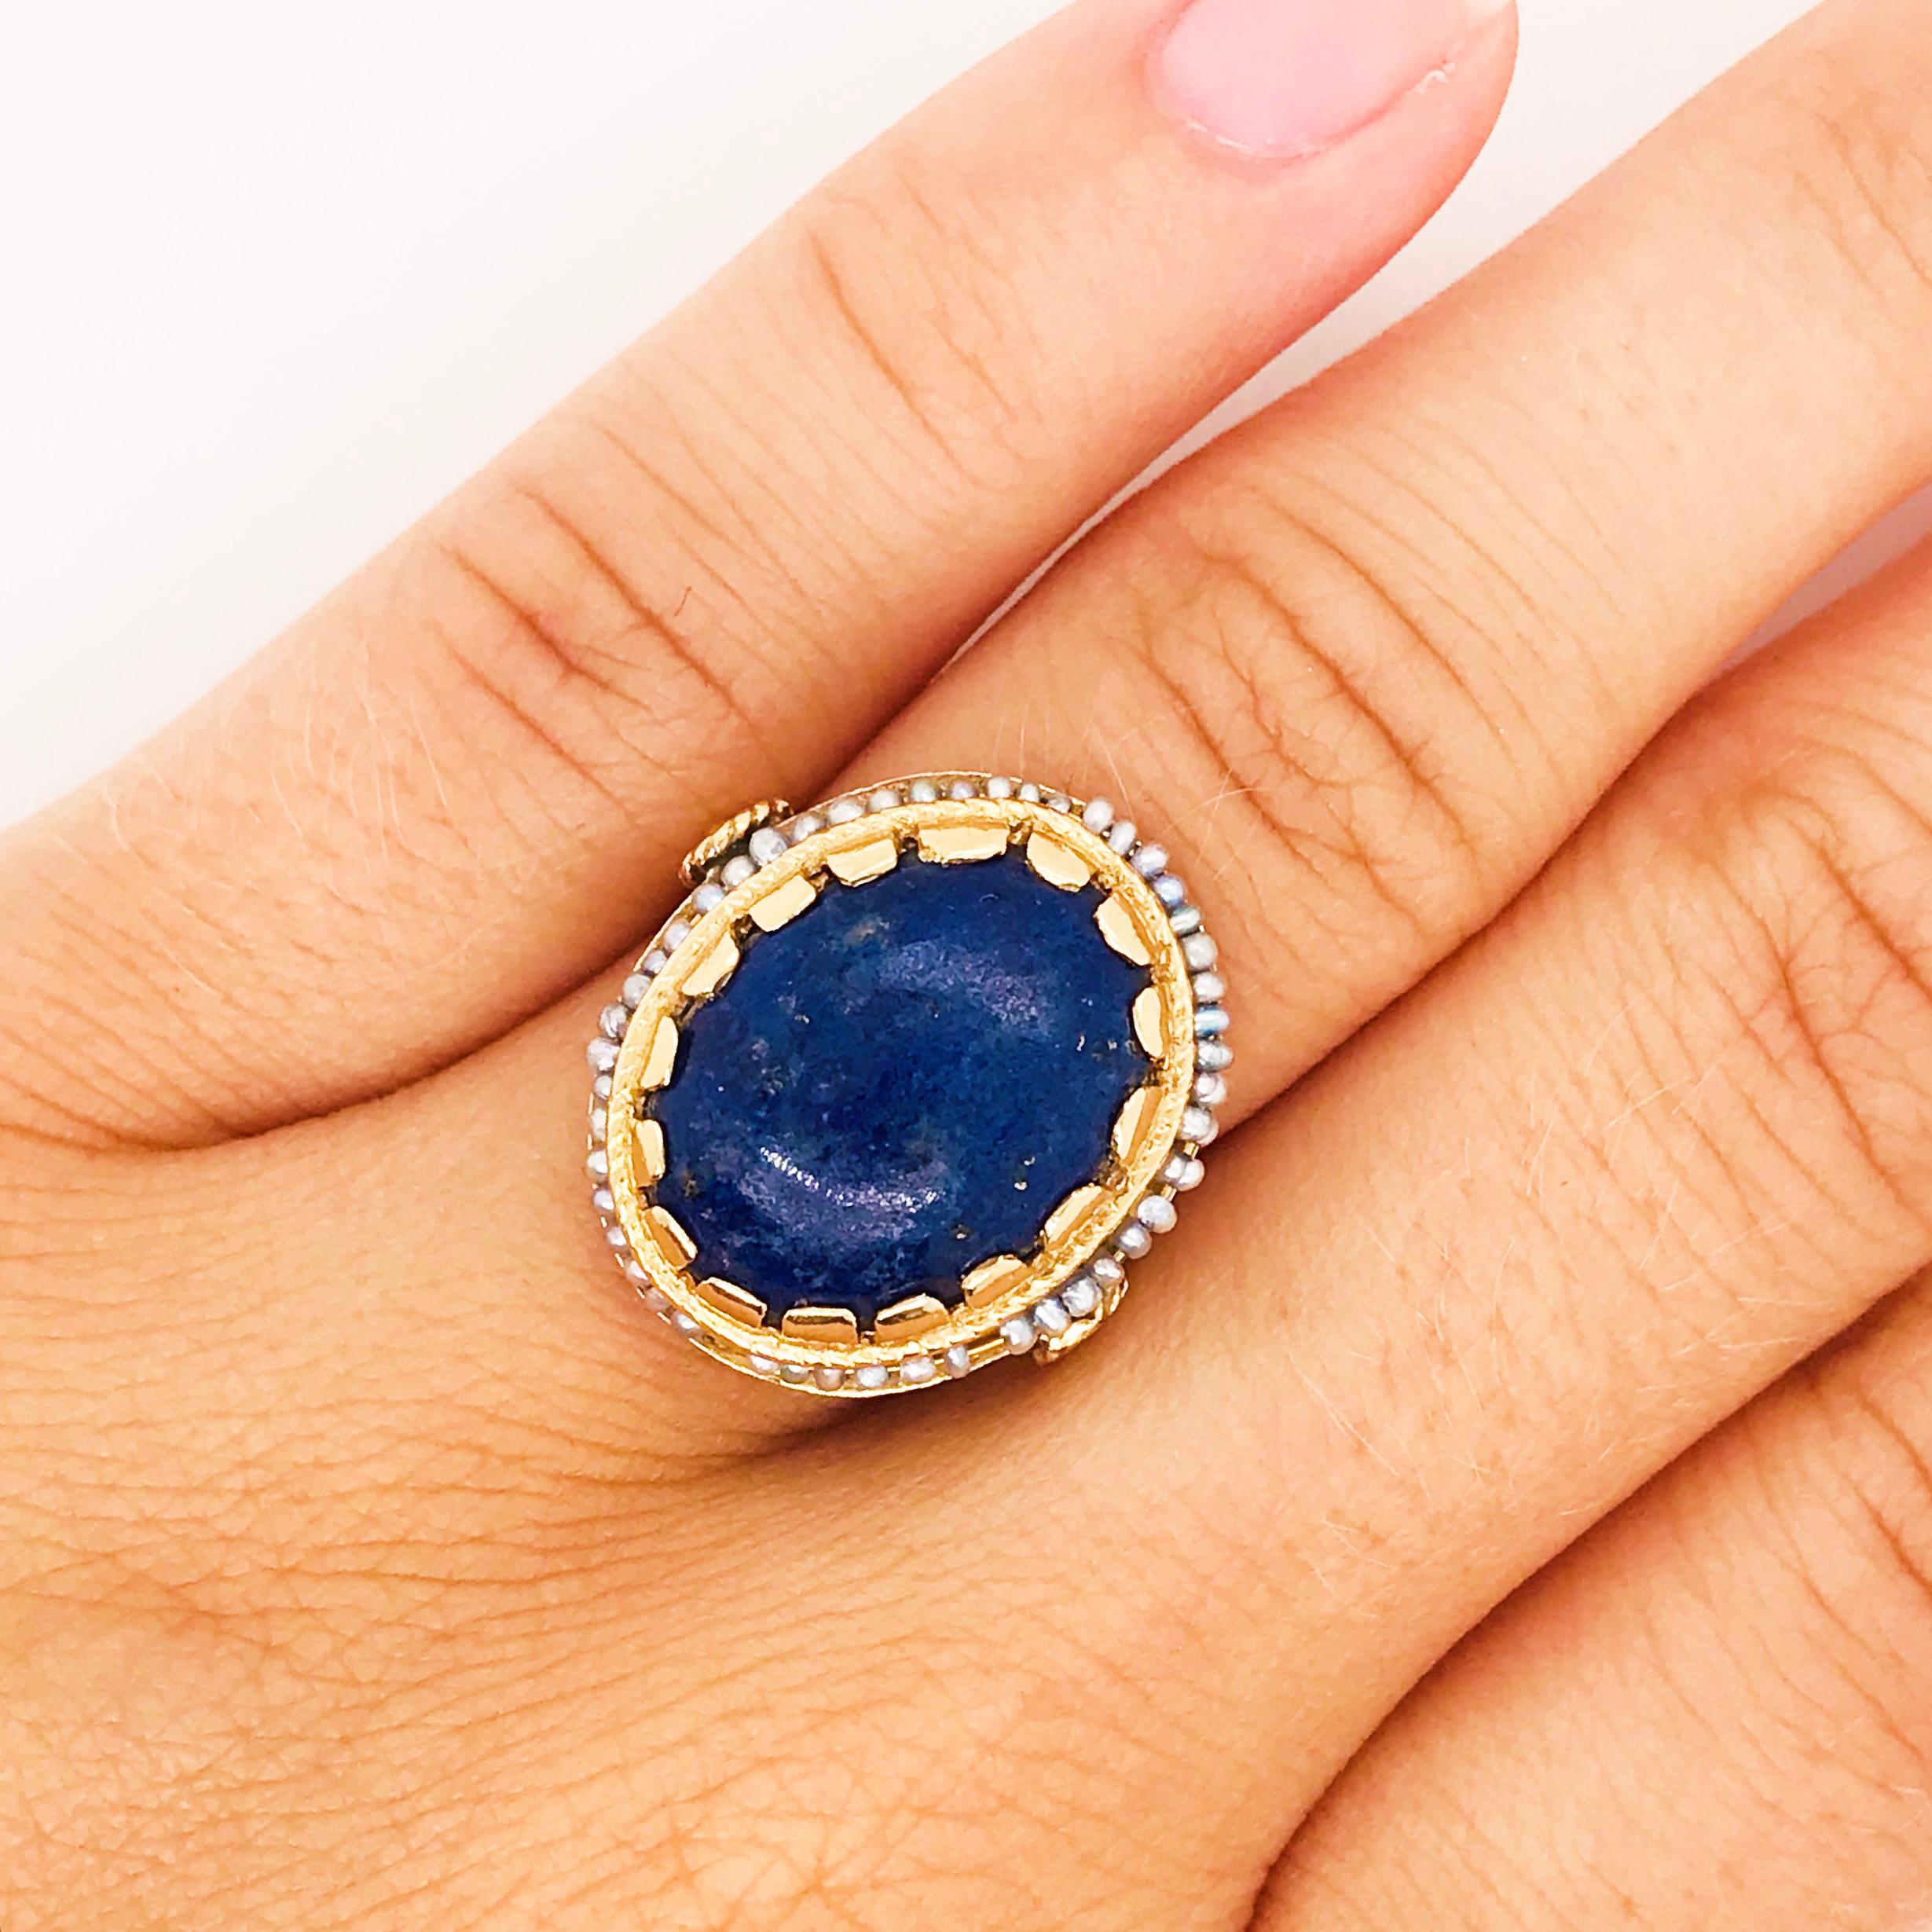 This Circa 1960 blue lapis and seed pearl ring is so interesting and eclectic. The blue lapis is 6 carats and oval in shape with a beautiful color with the natural gold veining in the gemstone.  The halo of seed pearls are all genuine, cultured